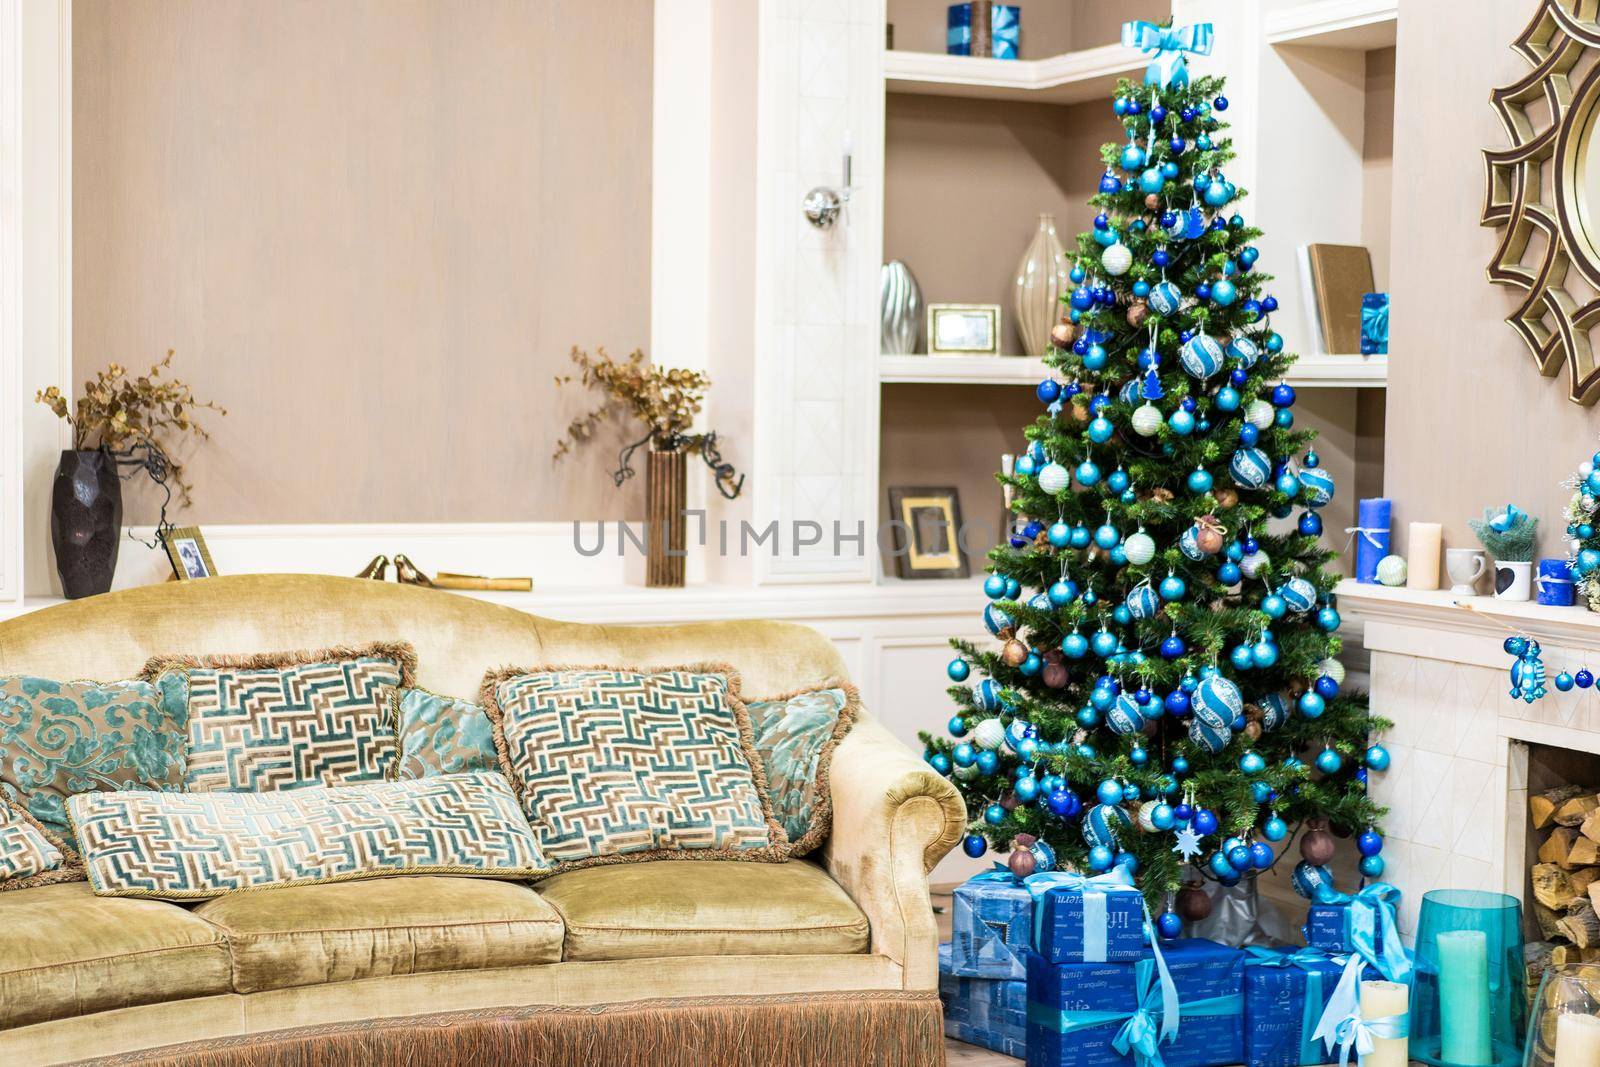 Beautiful New Year Interior with Christmas Tree in Corner. Couch with Pillows and Green Christmas Tree with Beautiful Presents.